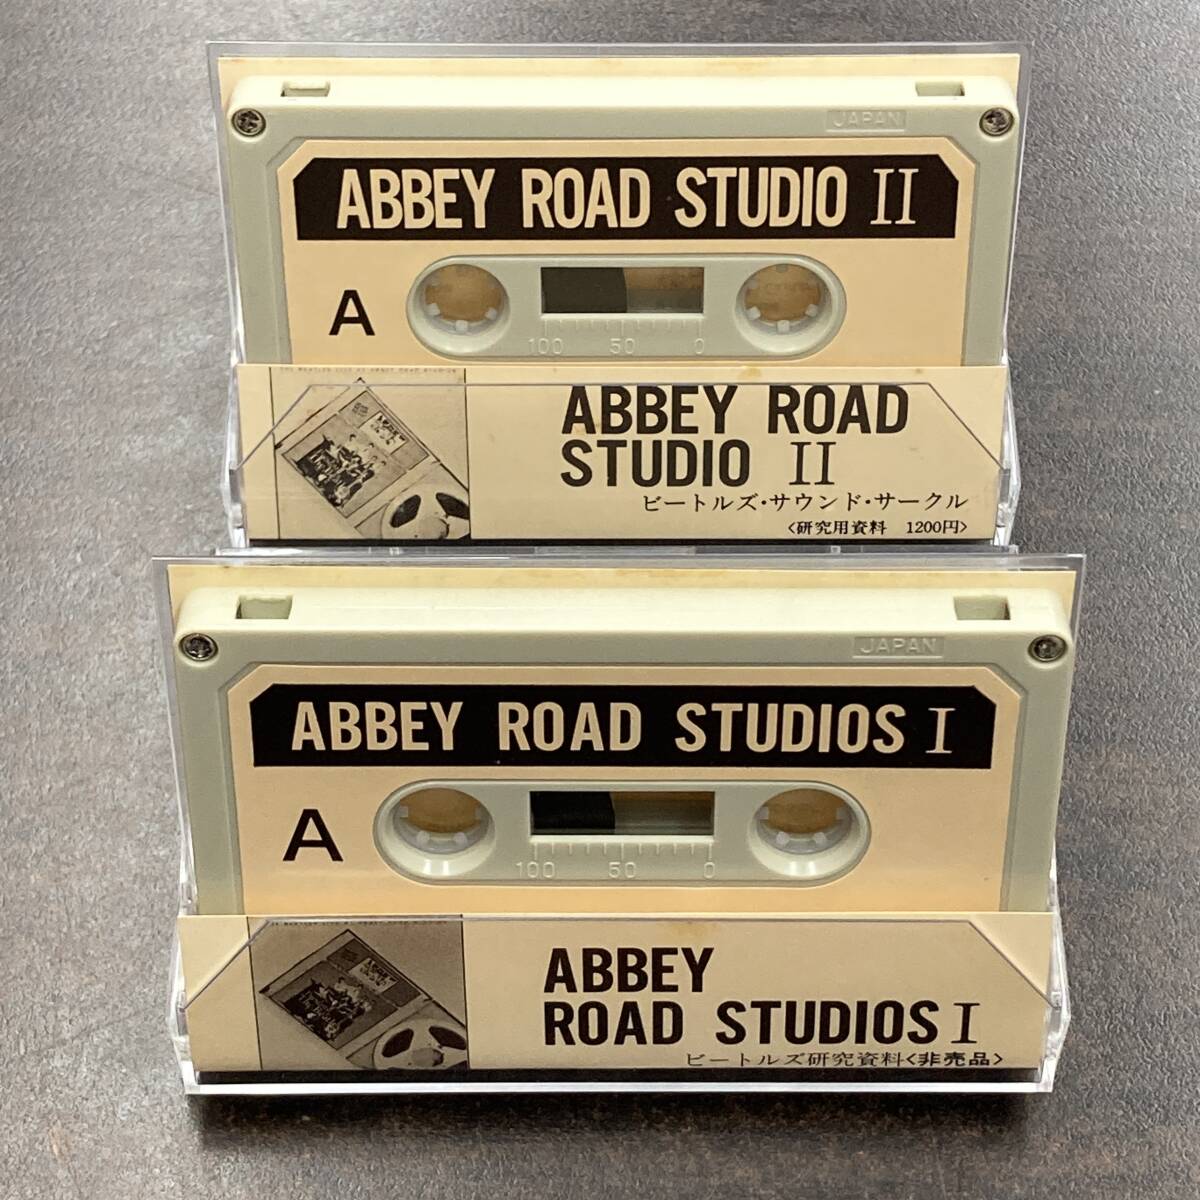 1201M ザ・ビートルズ 研究資料 ABBEY ROAD STUDIOS 1-2 カセットテープ / THE BEATLES Research materials Cassette Tapeの画像1